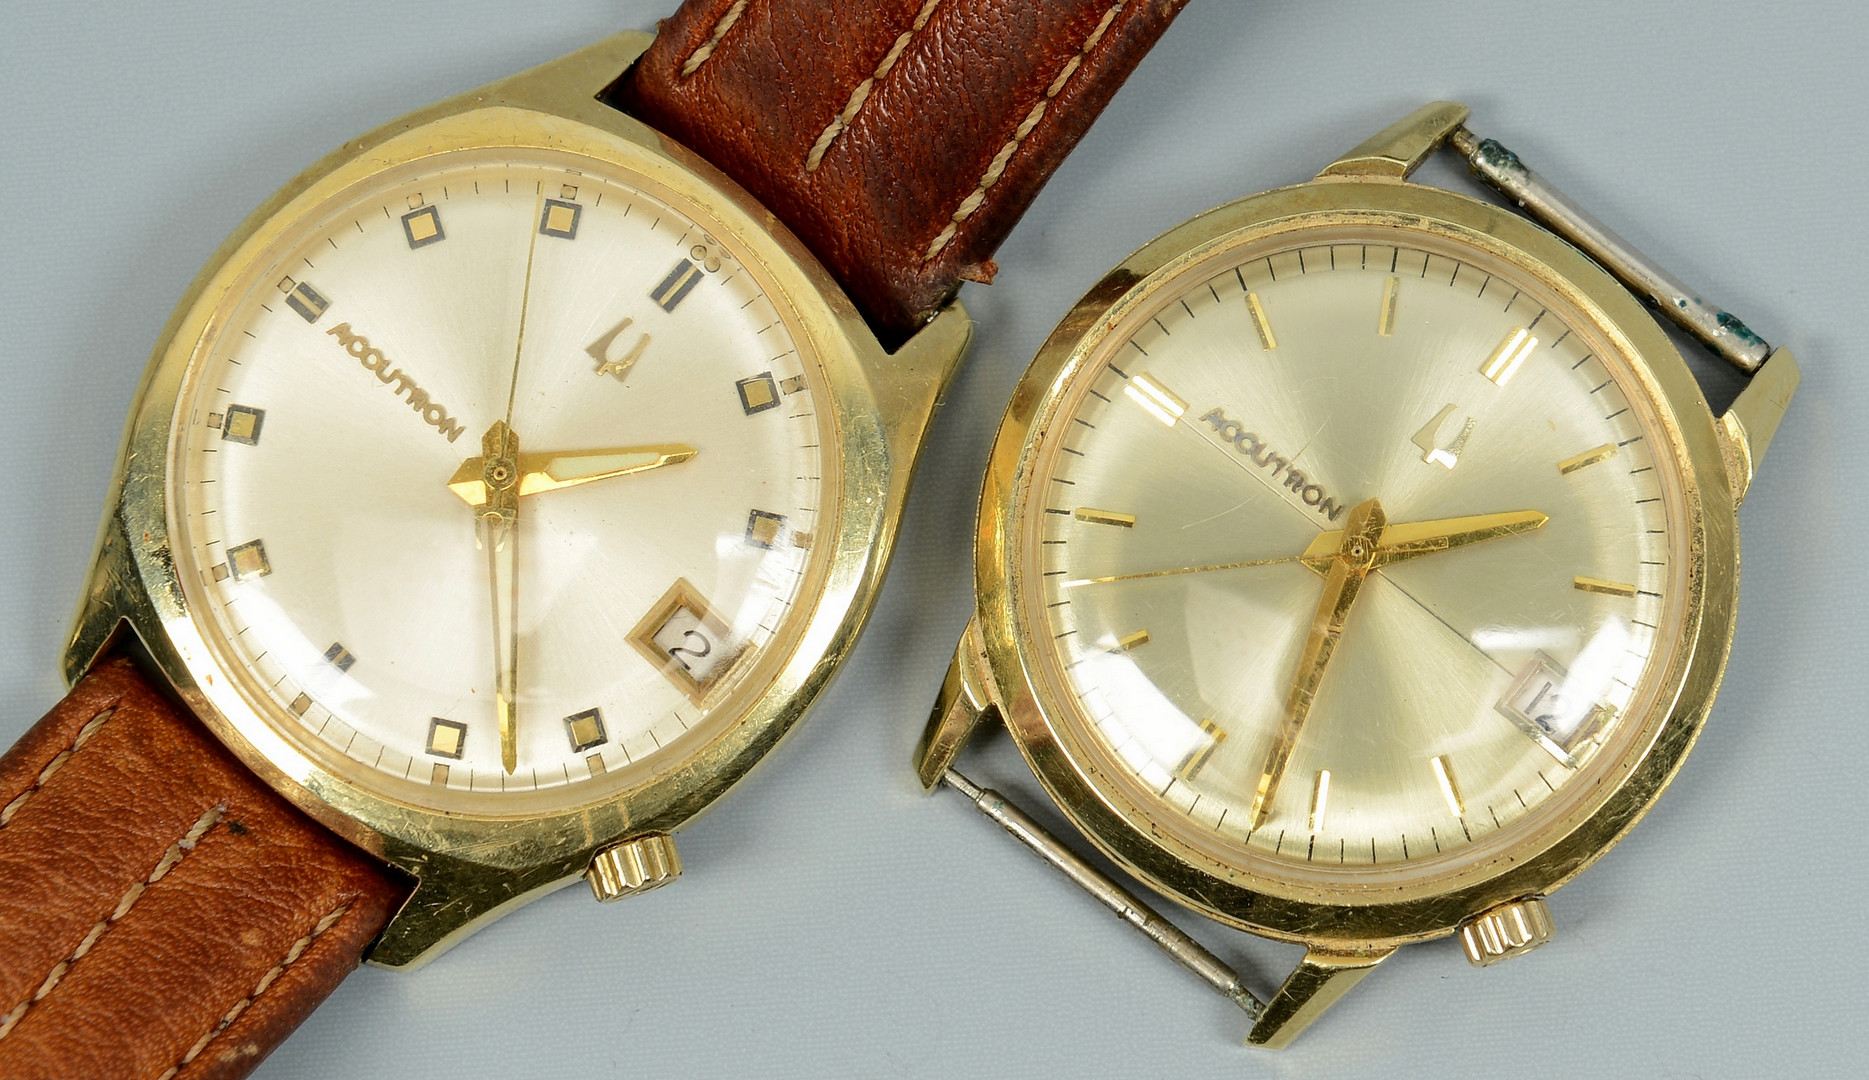 Lot 782: Four 14k Gold Wrist Watches